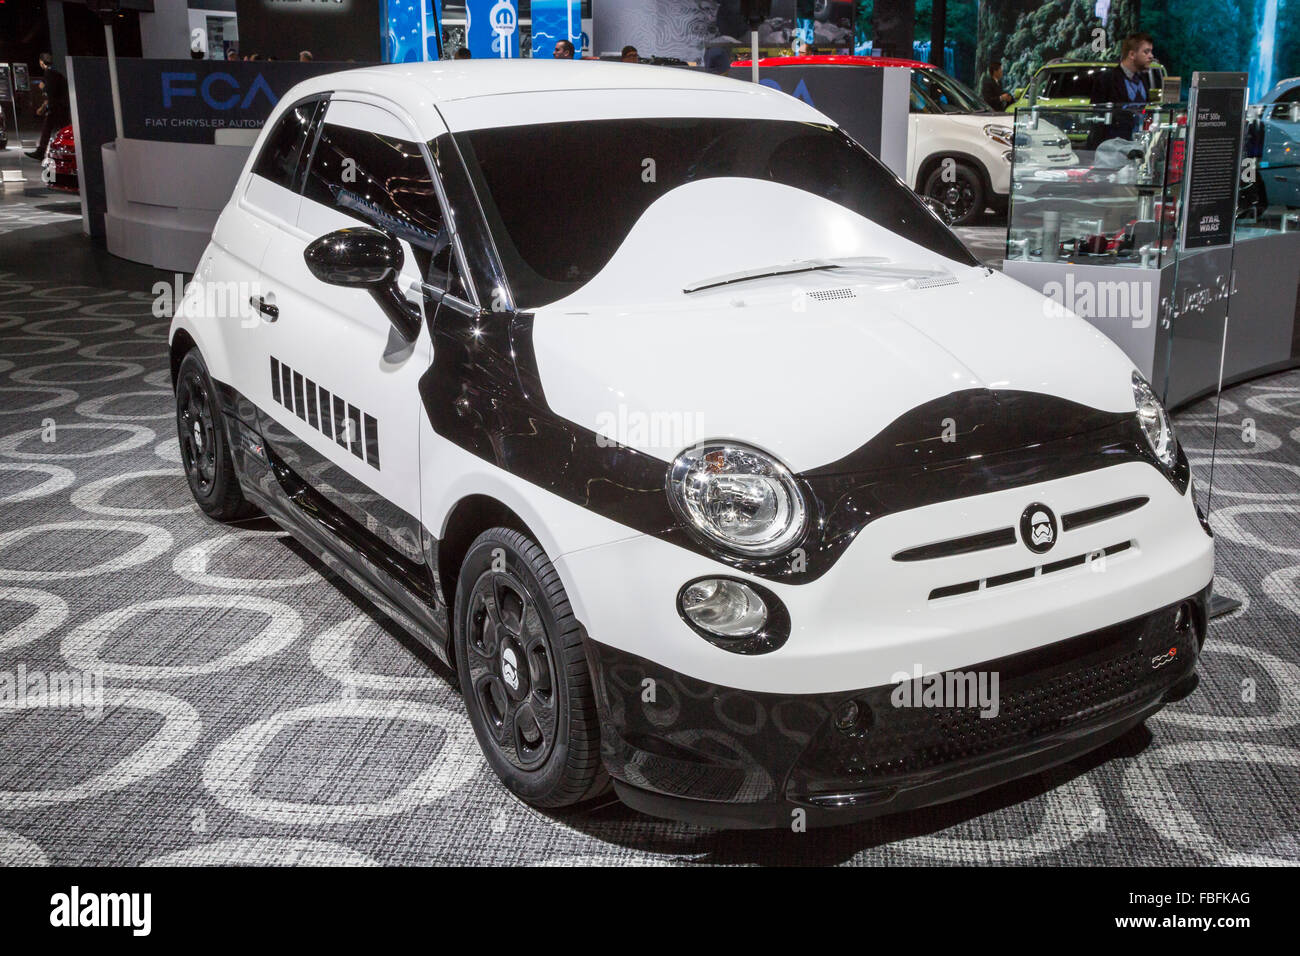 Detroit, Michigan - The Fiat 500e Stormtrooper concept car on display at the North American International Auto Show. Stock Photo